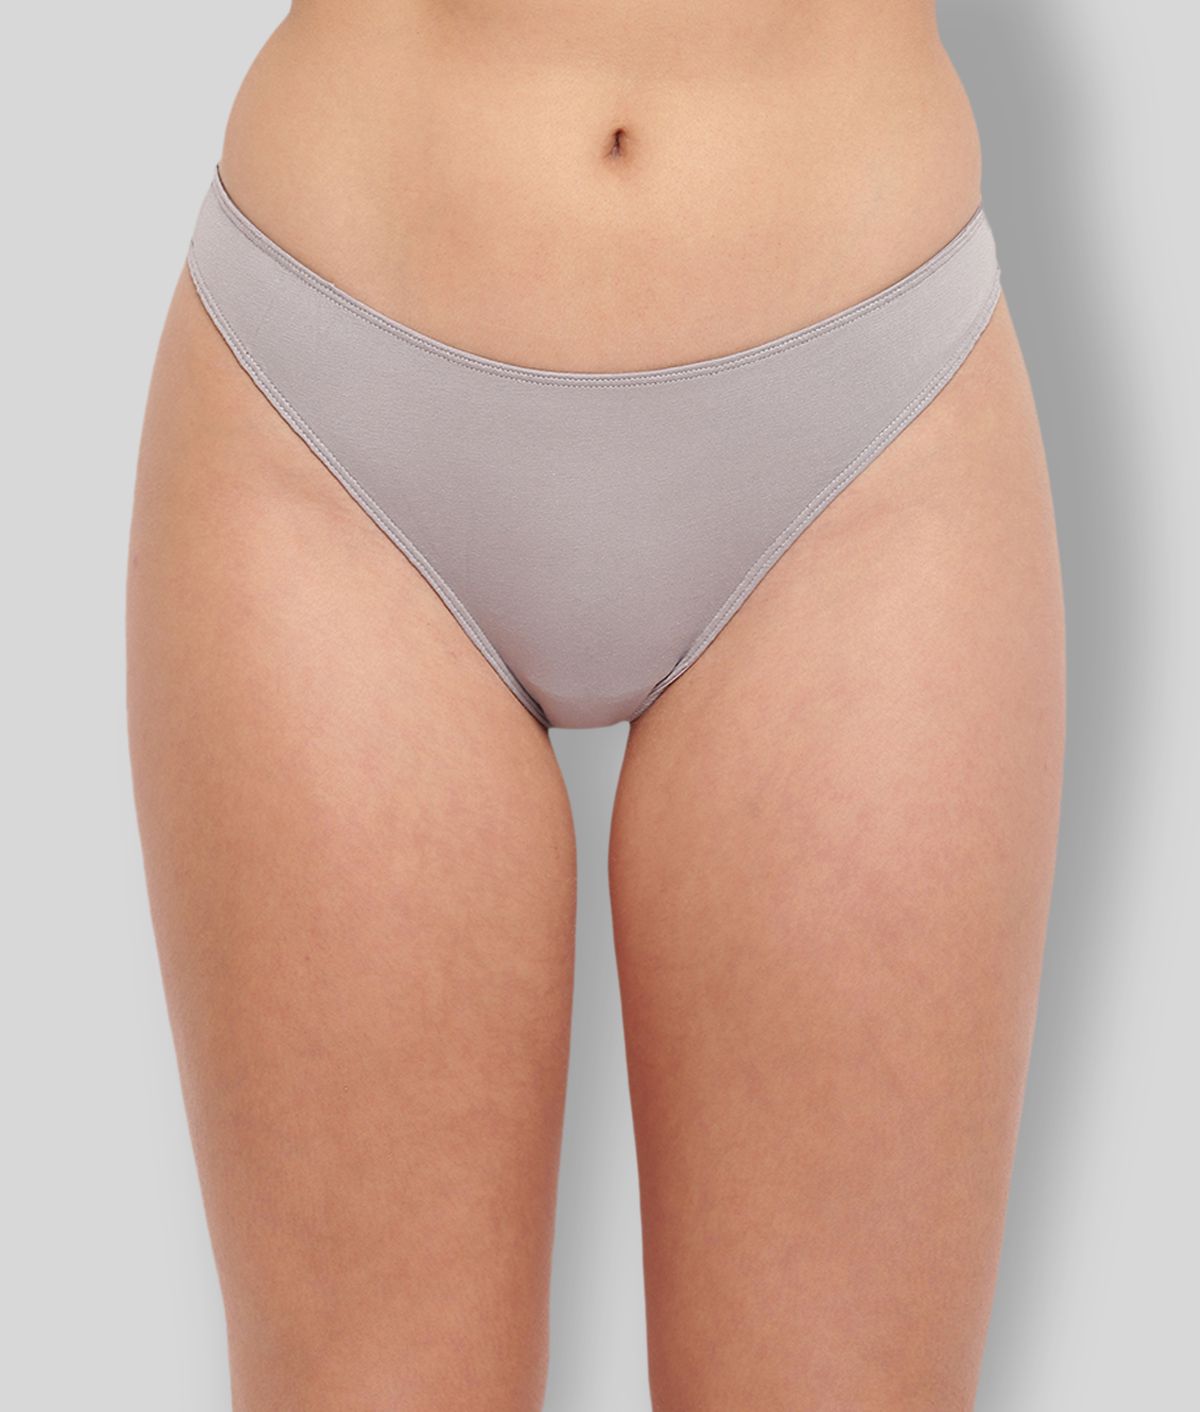     			BASIICS By La Intimo - Light Grey Cotton Blend Solid Women's Thongs ( Pack of 1 )